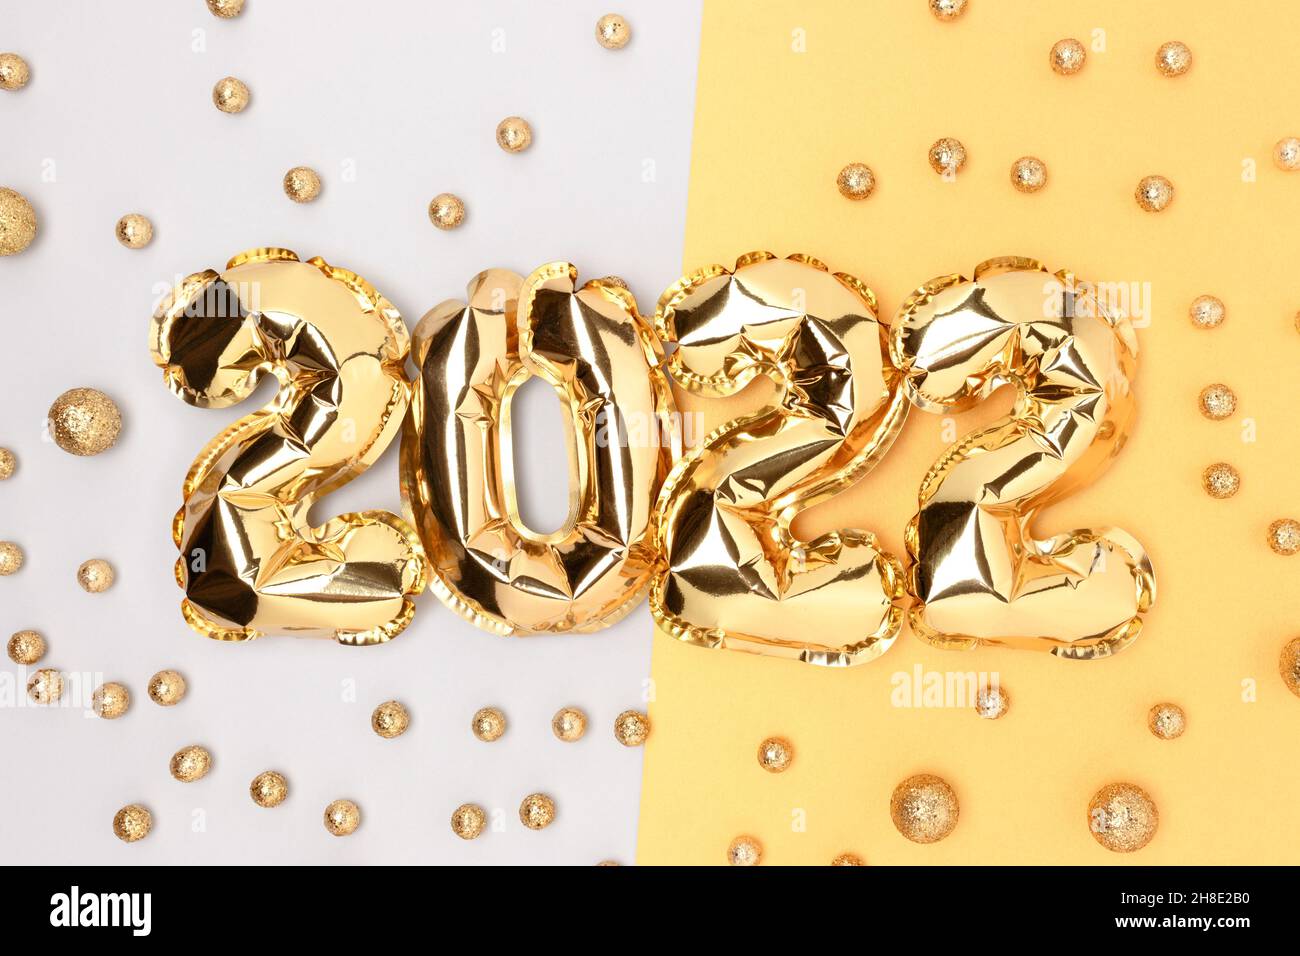 2022 inflatable golden balloons and golden round confetti. New Year's concept. Stock Photo